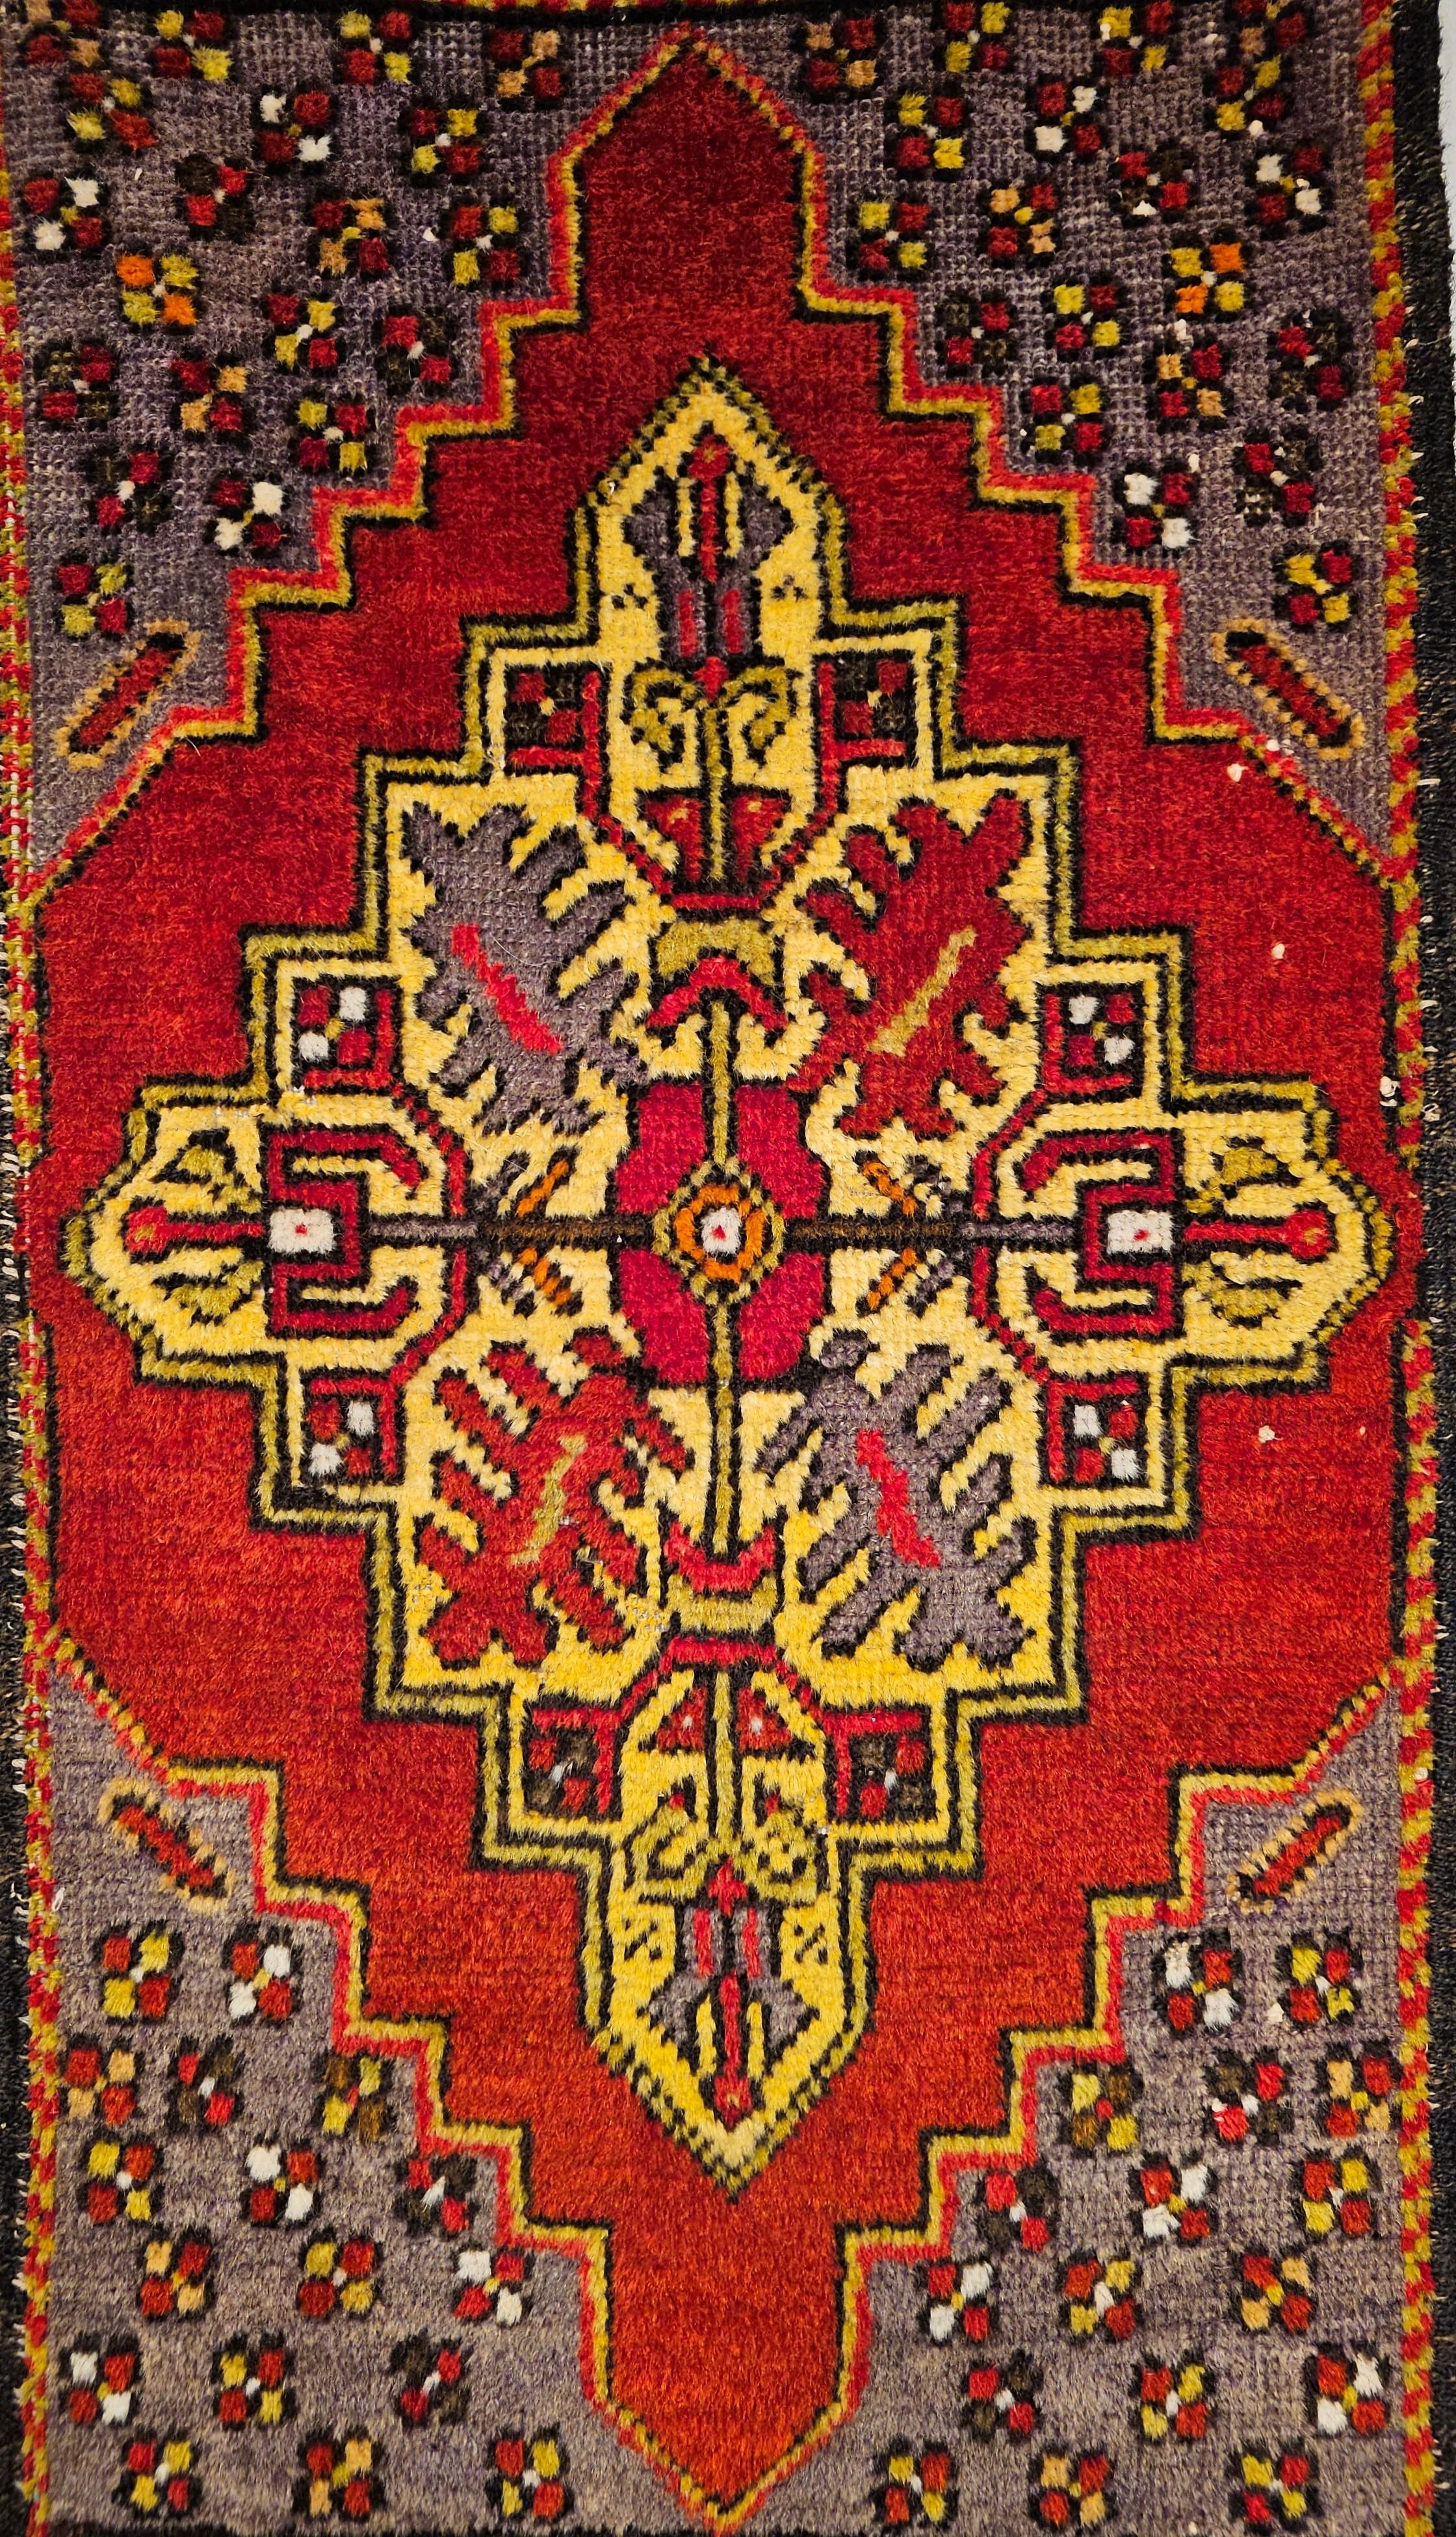  A beautiful Anatolian village rug in a prayer rug design in vibrant colors including yellow, red, purple from the mid 1900s .  The rug has a central medallion in a wonderful yellow color with designs in red set on a bright red background.  The